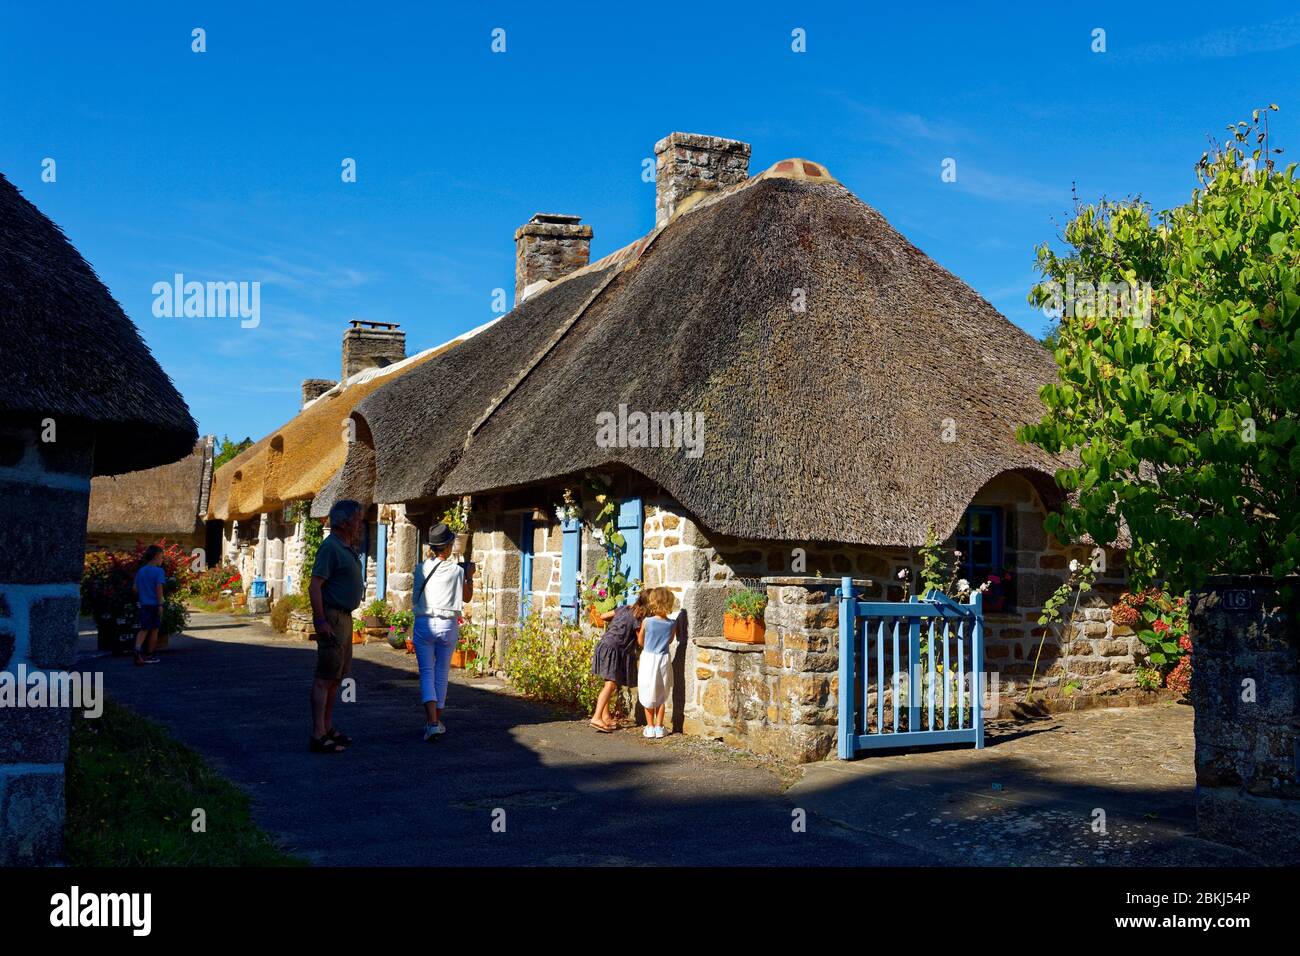 France, Finistere, Pont Aven Region near Nevez, Thatched Cottages of Kerascoet Stock Photo